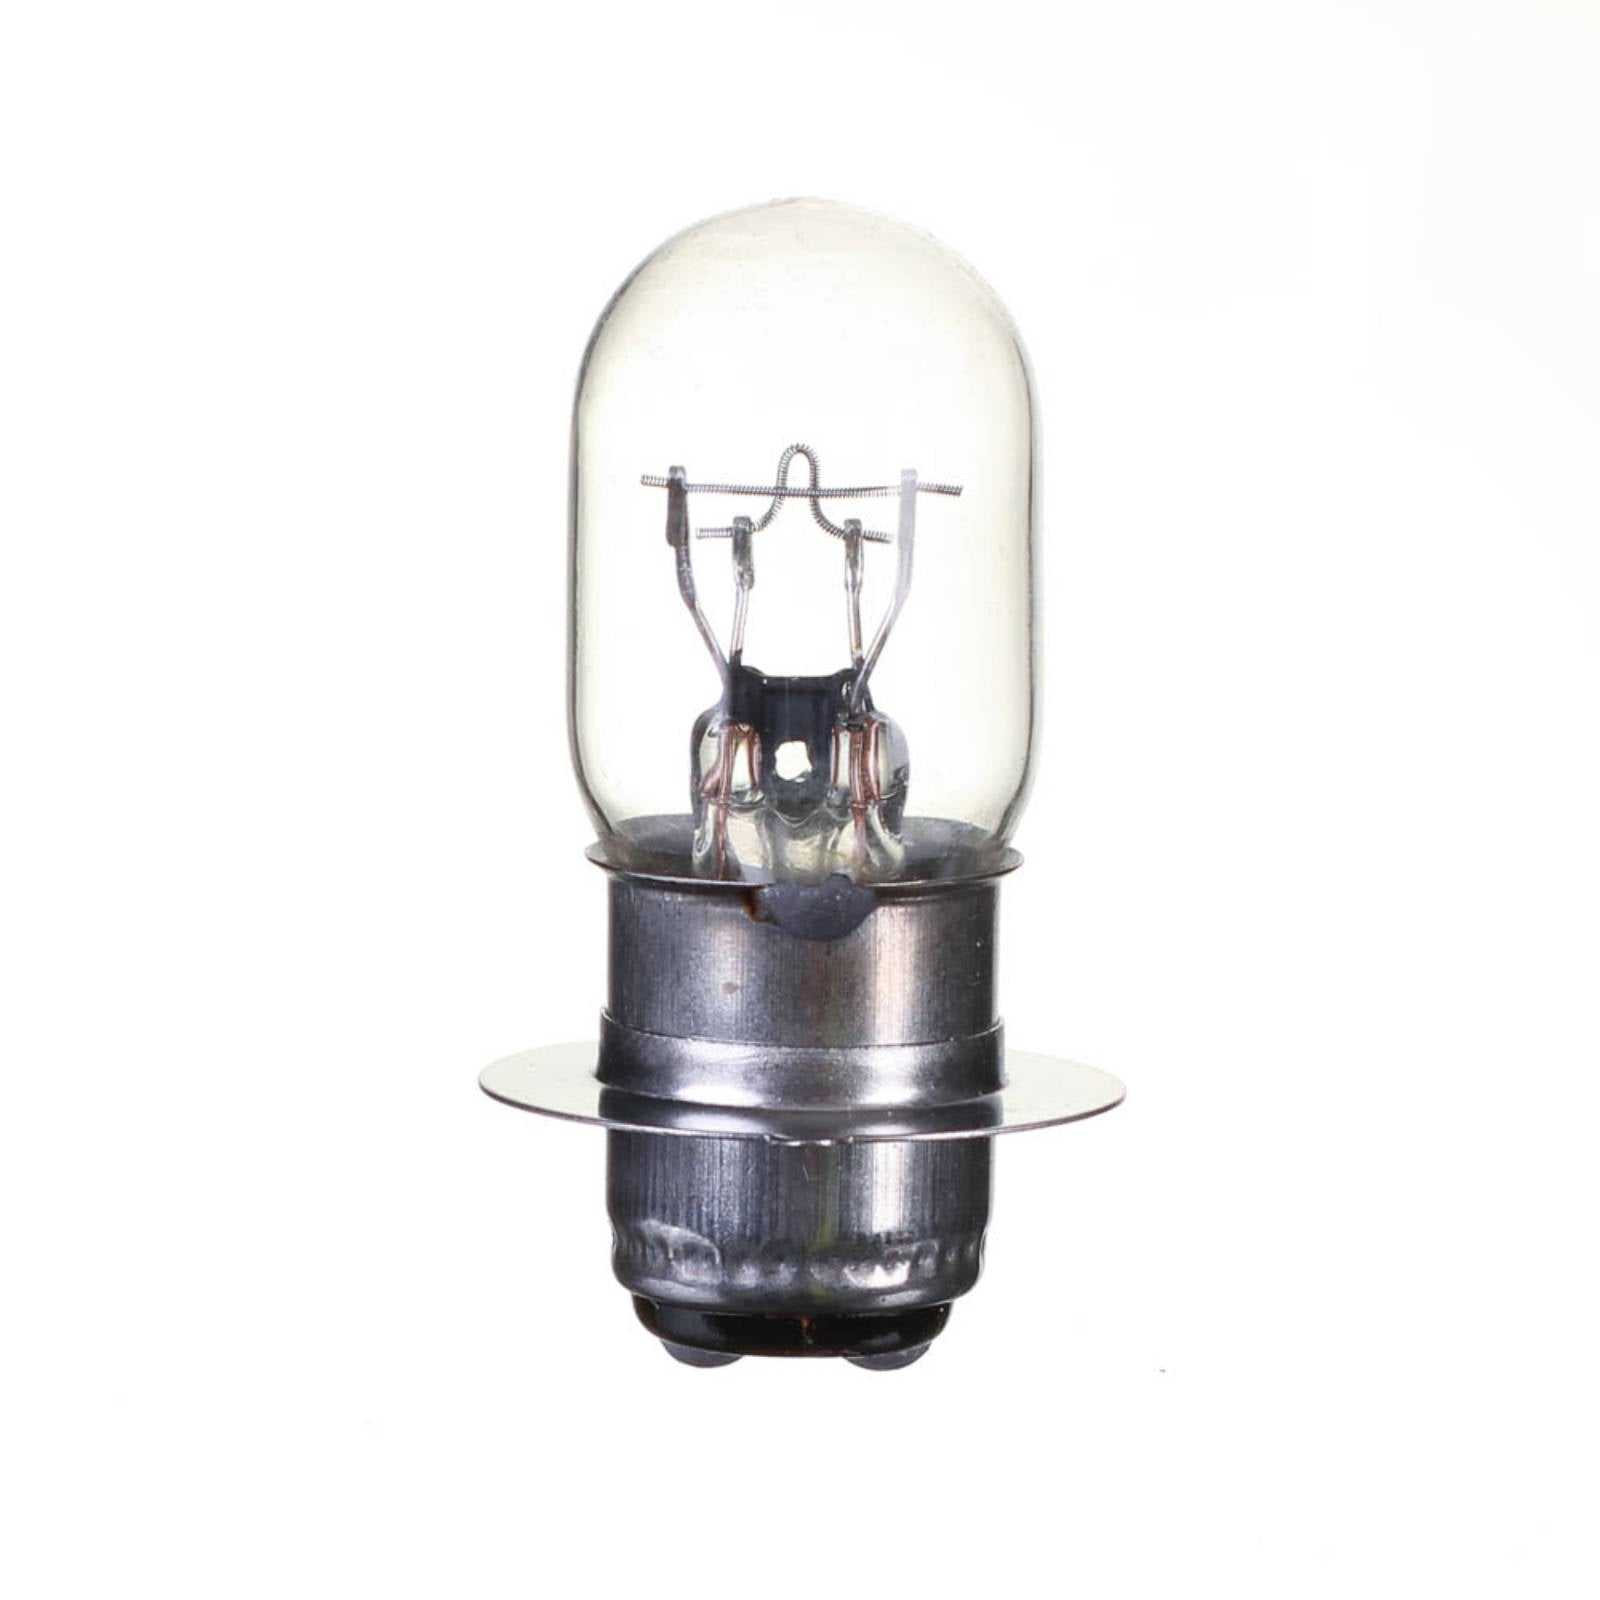 Whites Motorcycle Parts, BULBS 12V 25/25W H/L (P15D-25-1/H6M) (A3603) (Pkt of 10)